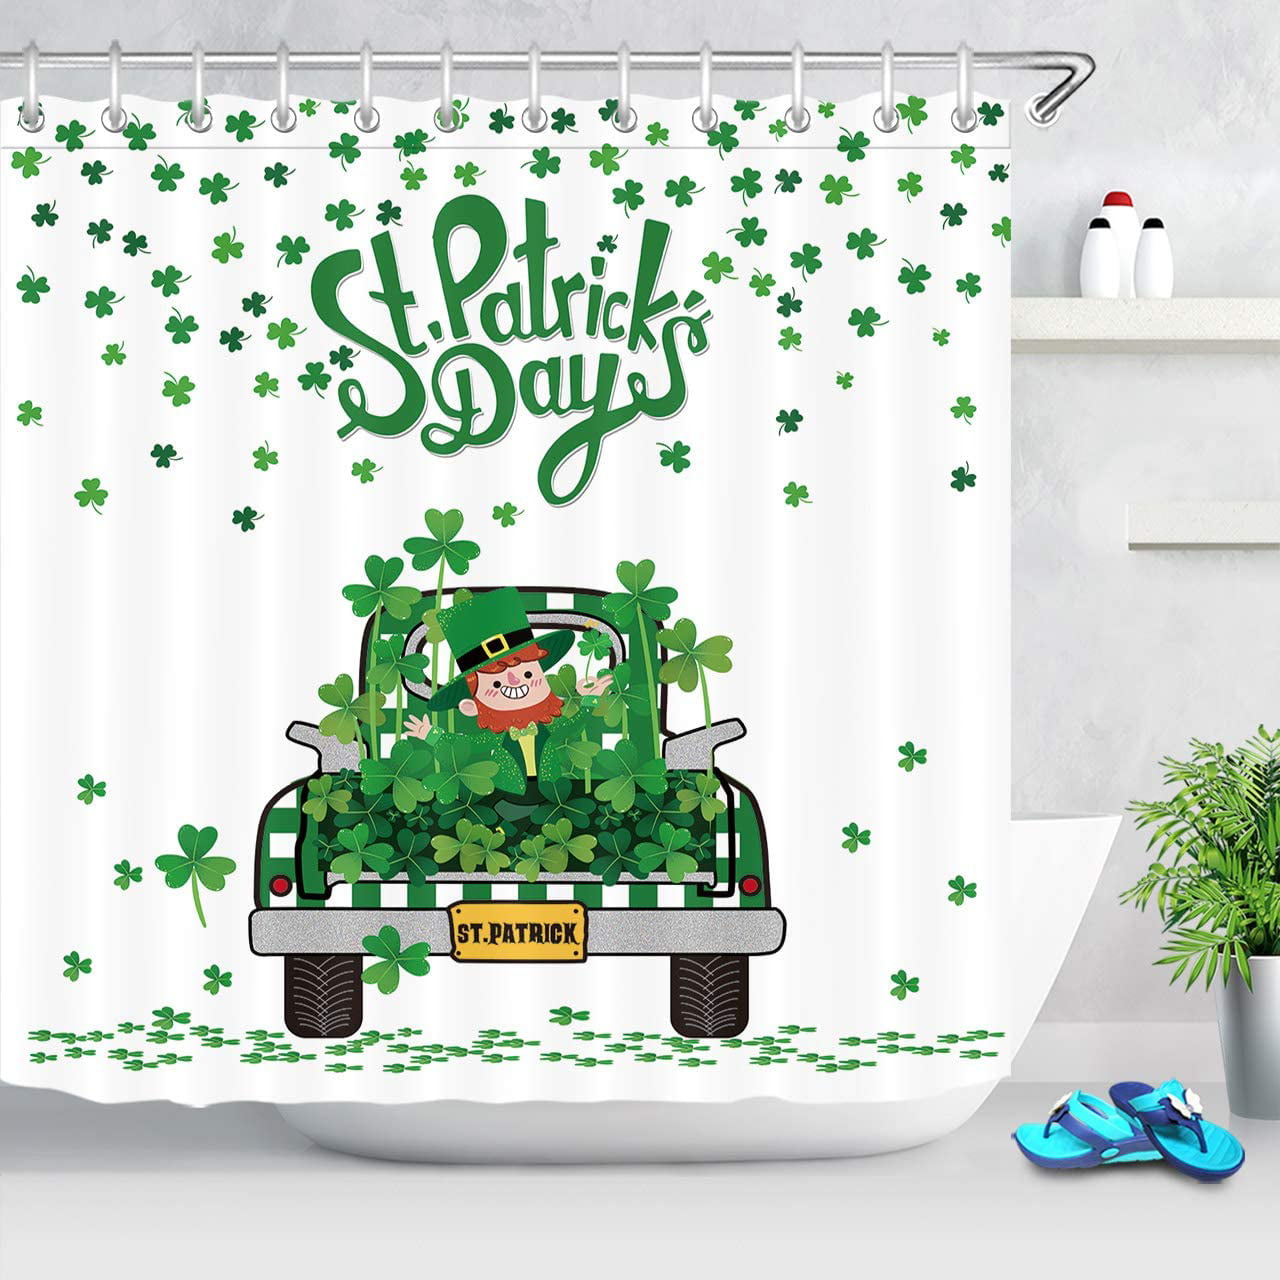 Patrick's Day Falling Green Clover Leafs Polyester Fabric Shower Curtain Set St 